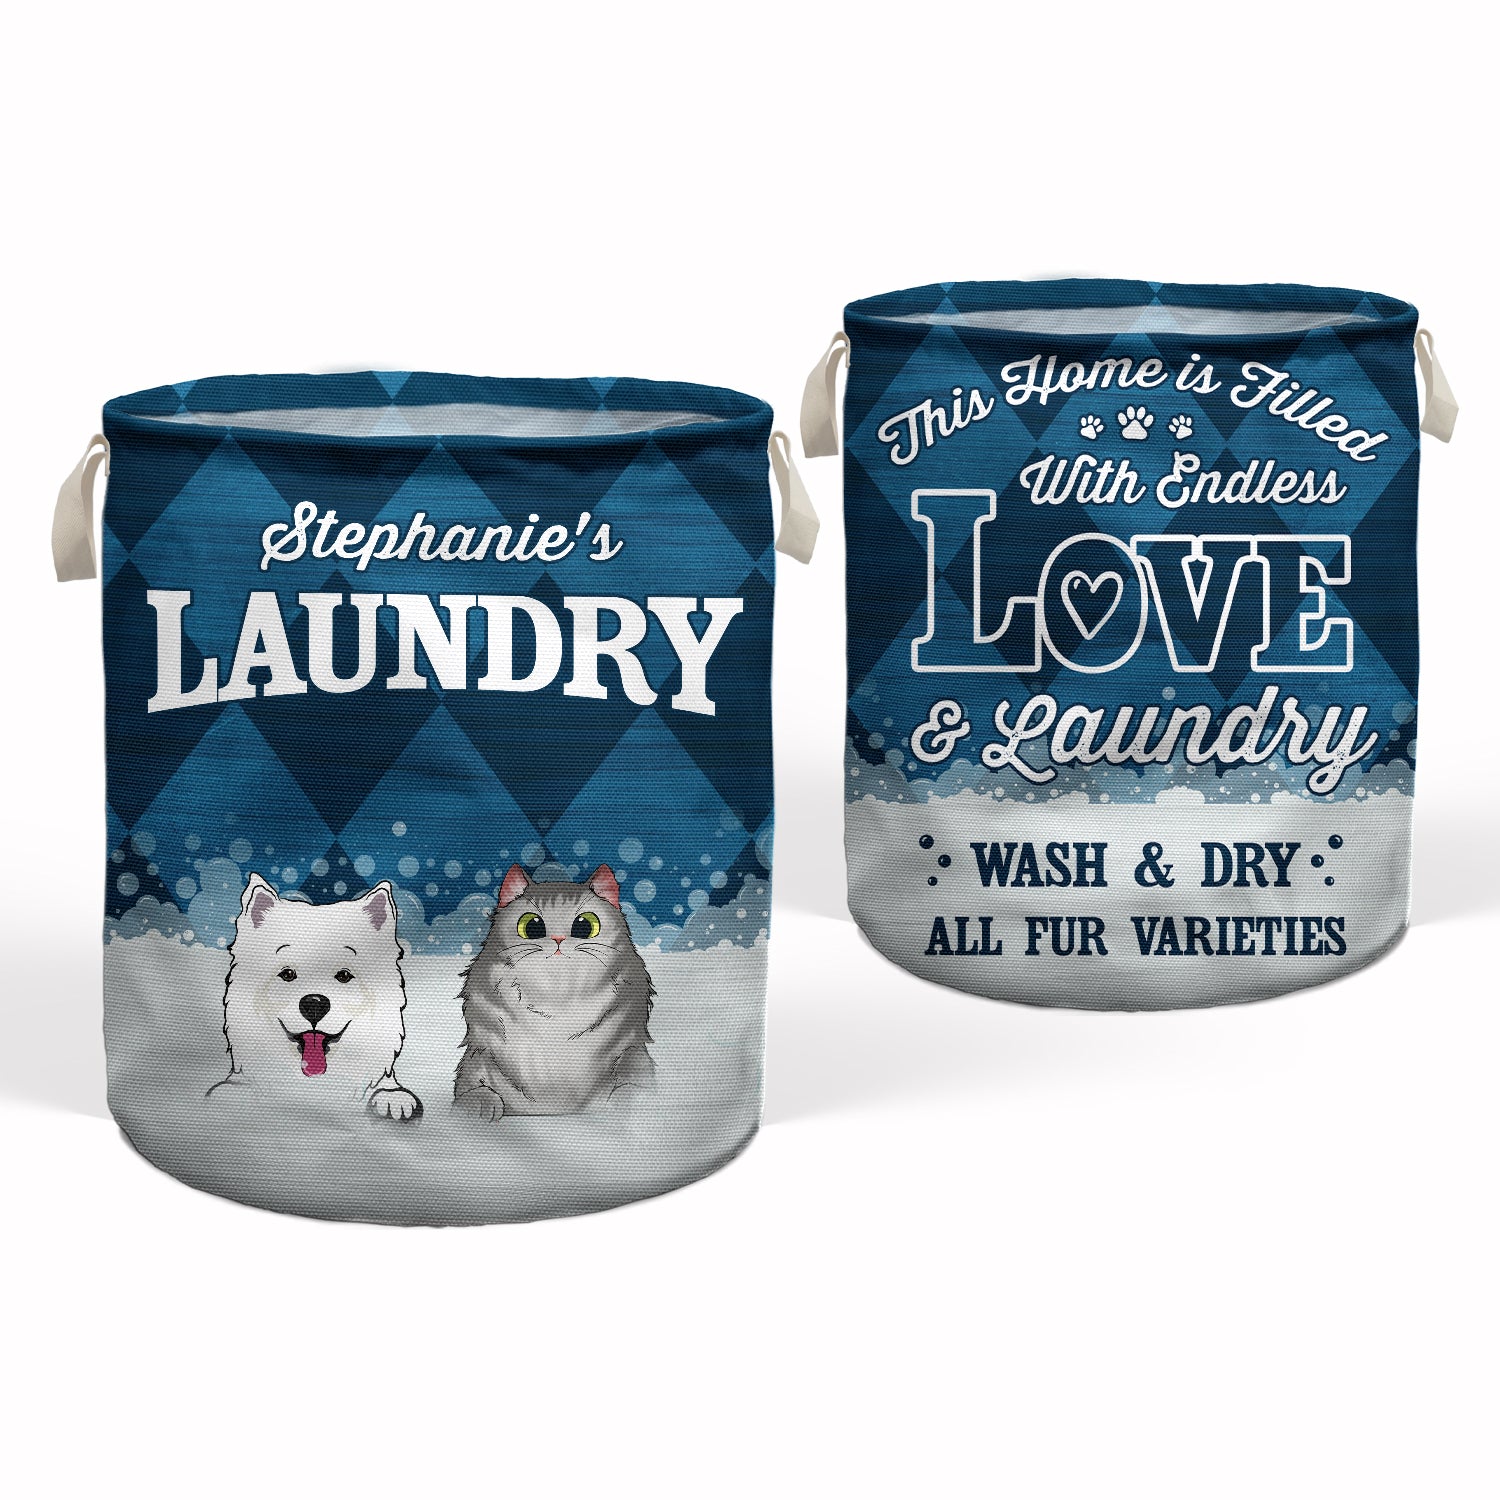 Endless Love And Laundry - Laundry Room Decor For Dog Lovers, Cat Lovers - Personalized Custom Laundry Basket